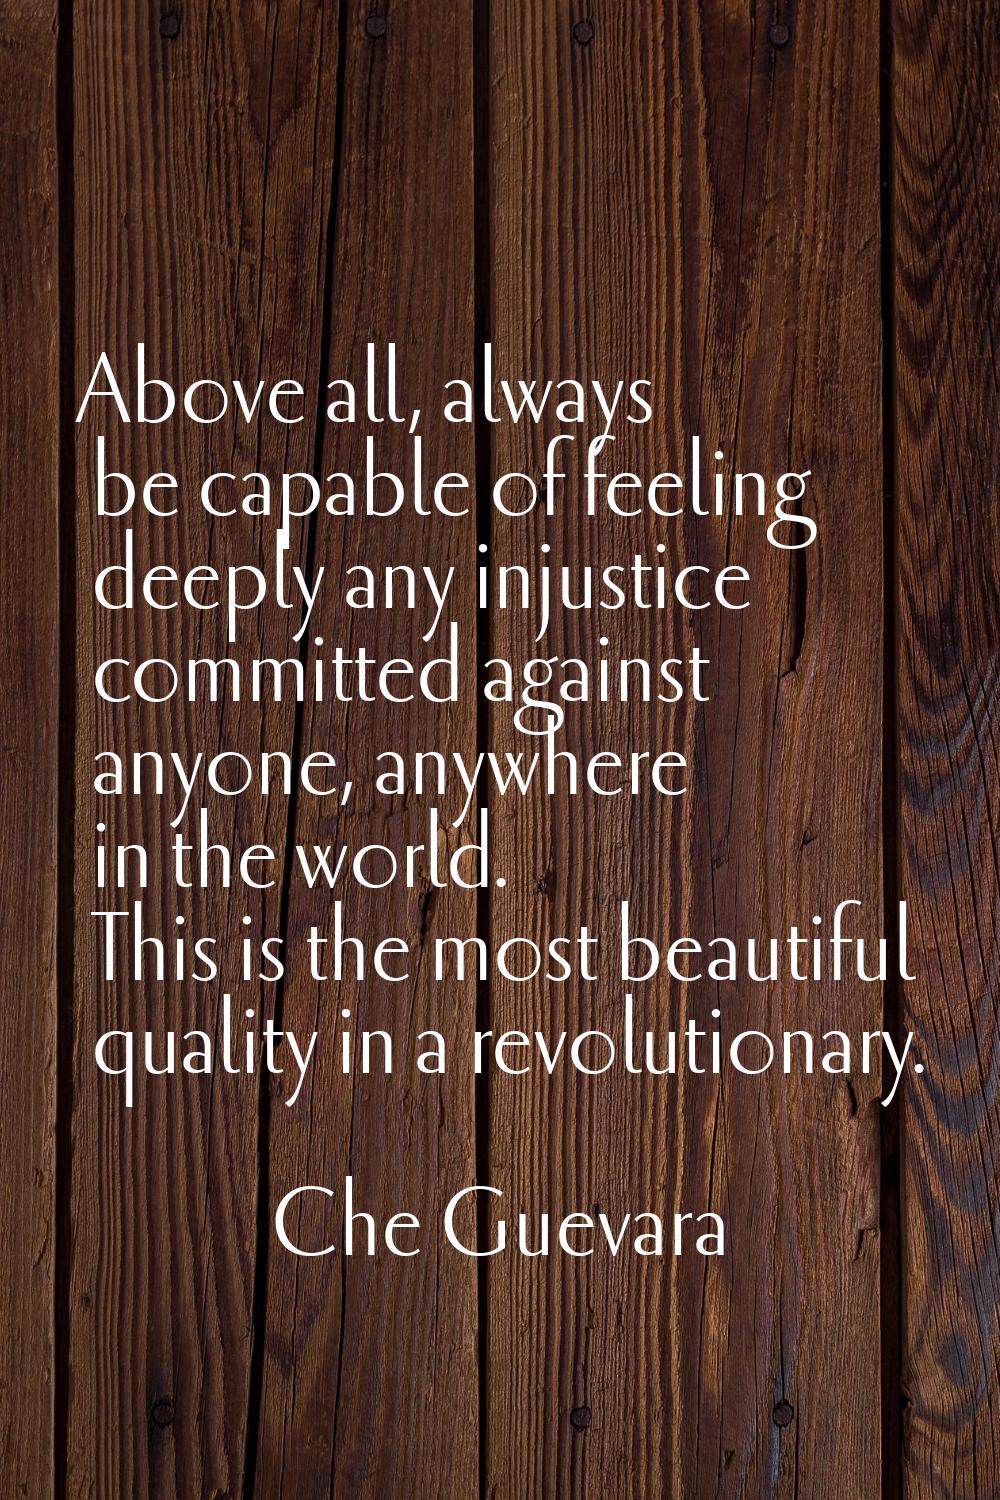 Above all, always be capable of feeling deeply any injustice committed against anyone, anywhere in 